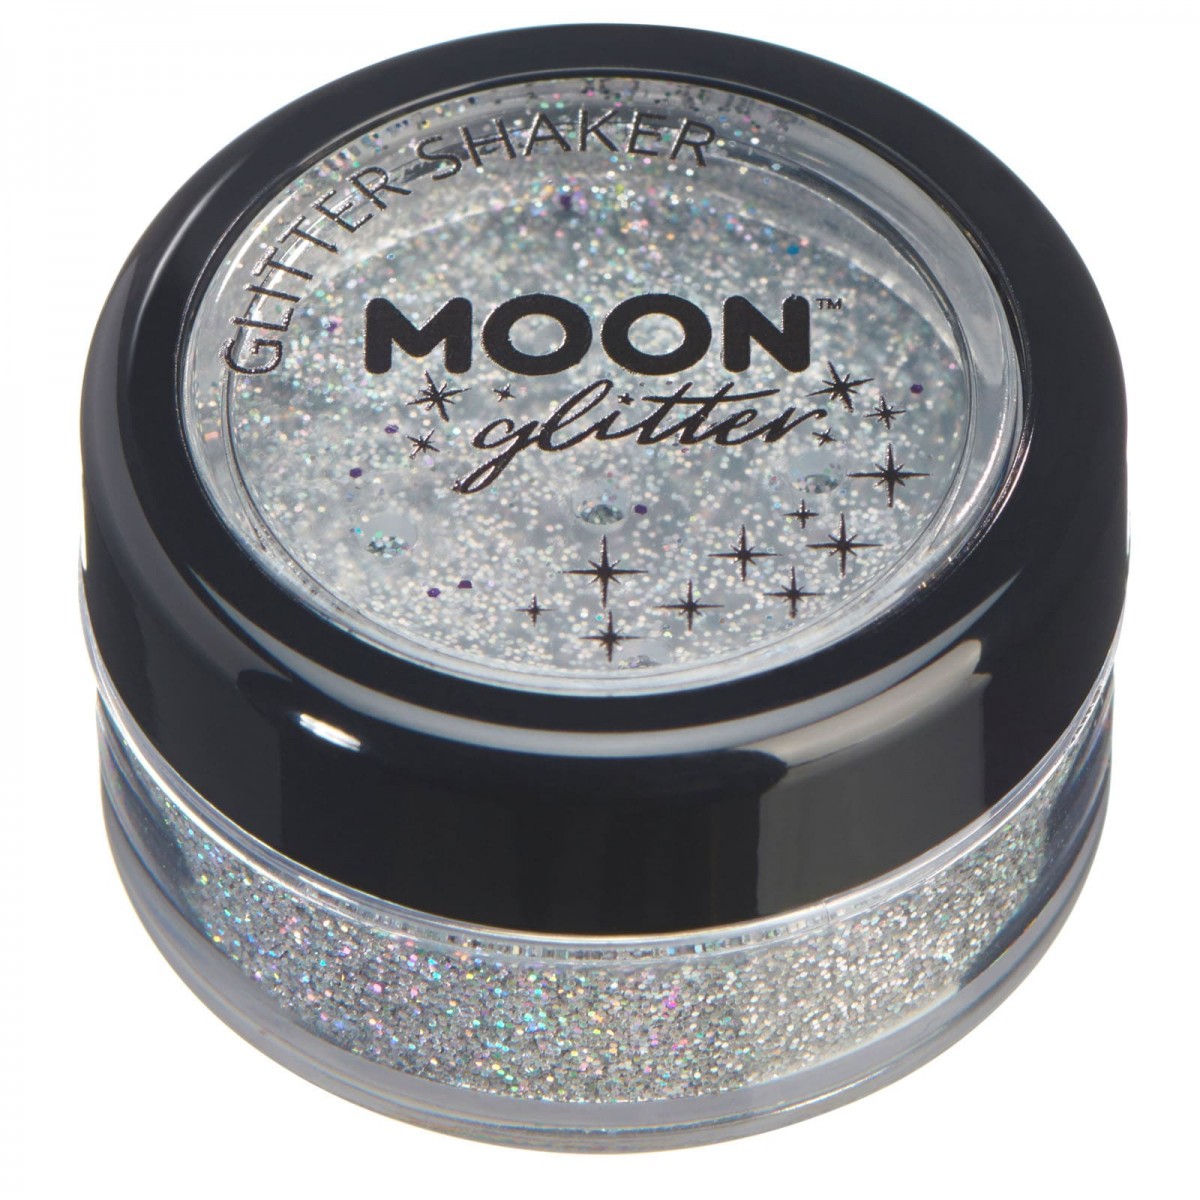 MOON CREATIONS G16 HOLOGRAPHIC GLITTER SHAKER SILVER 5g